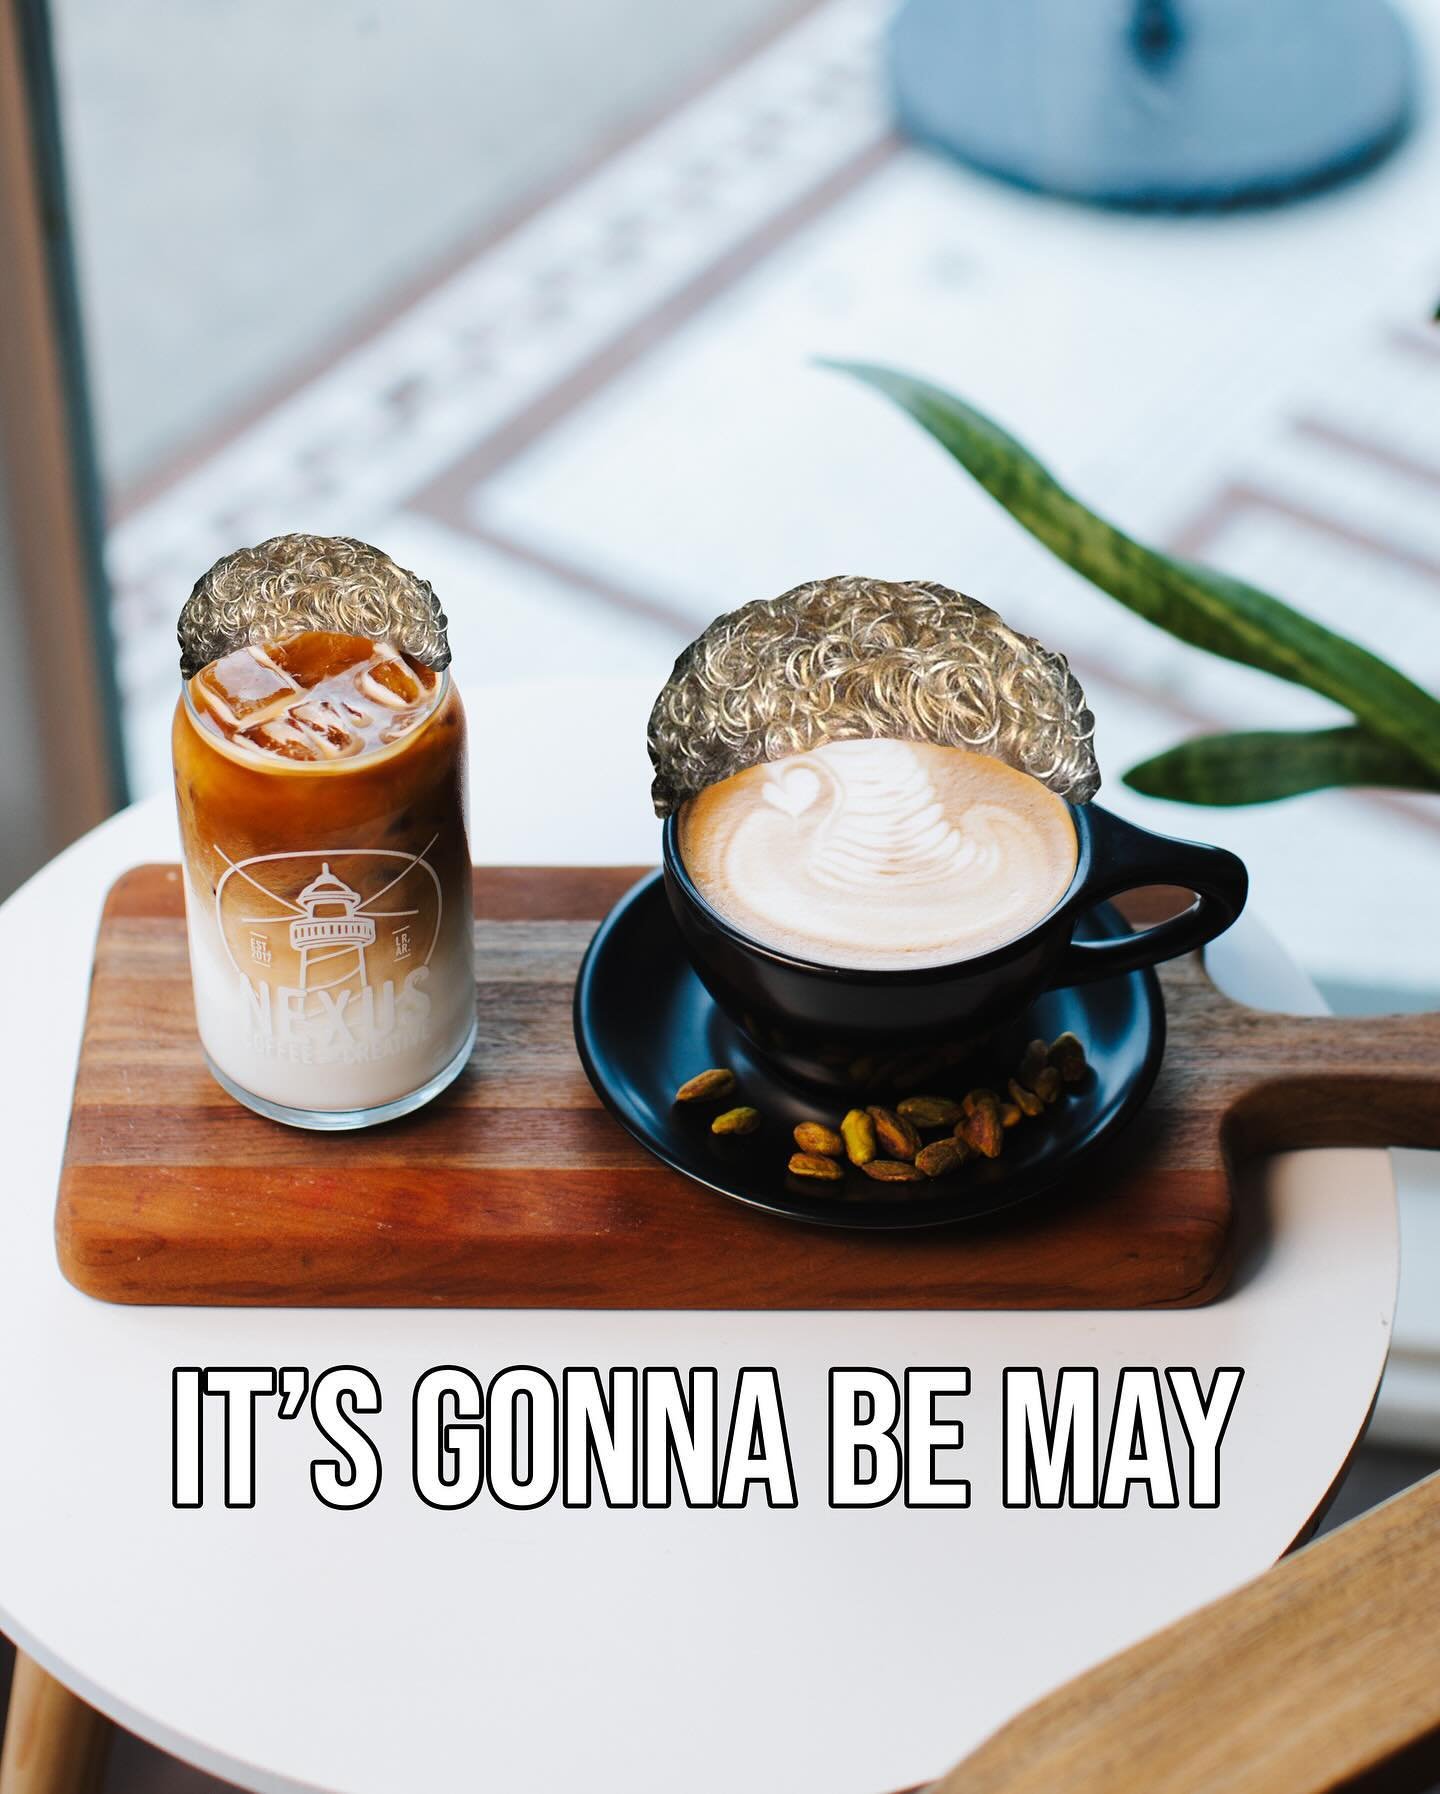 Today is May 1...you know what that means. Ramen noodle hair swag all day long. 🍜 
.
.
.
#coffee #coffeeshop #local #shoplocal #localcoffee #localcoffeeshop #arkansas #littlerock #littlerockarkansas #nexuscoffeear #itsgonnabemay #may #itsgonnabemaym